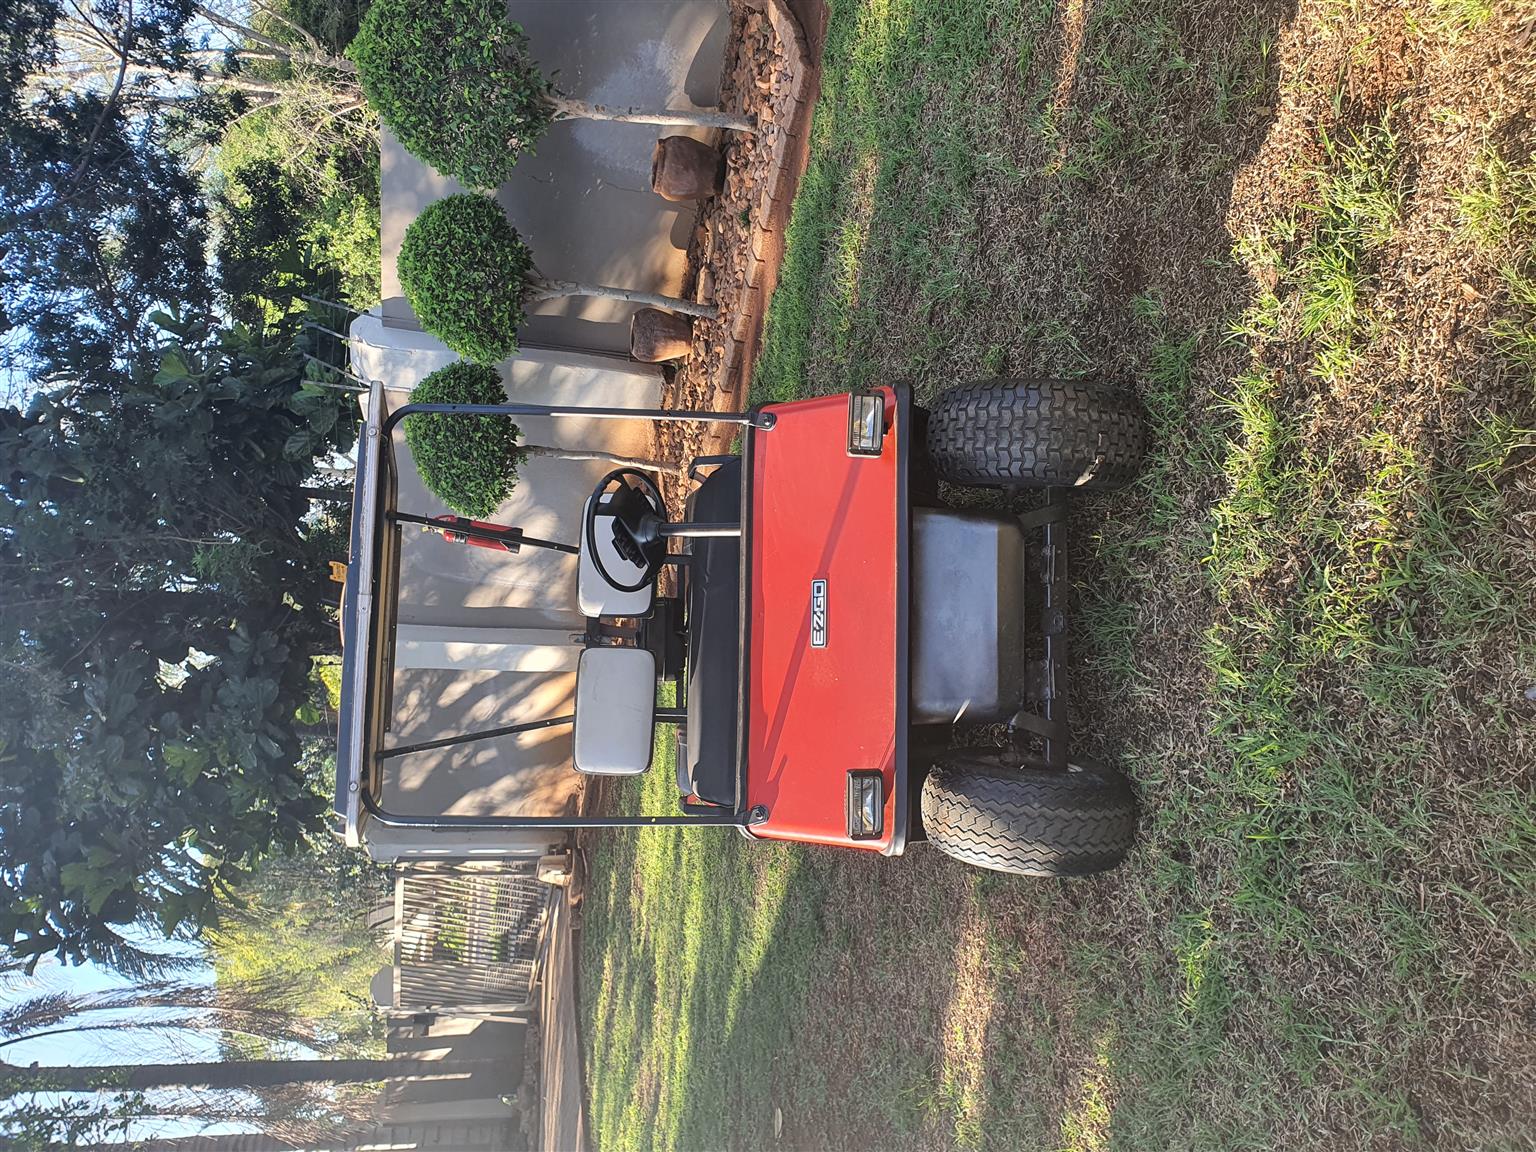 Ezgo 4stroke petrol golf cart for sale. Brand new engine, clutch and battery.